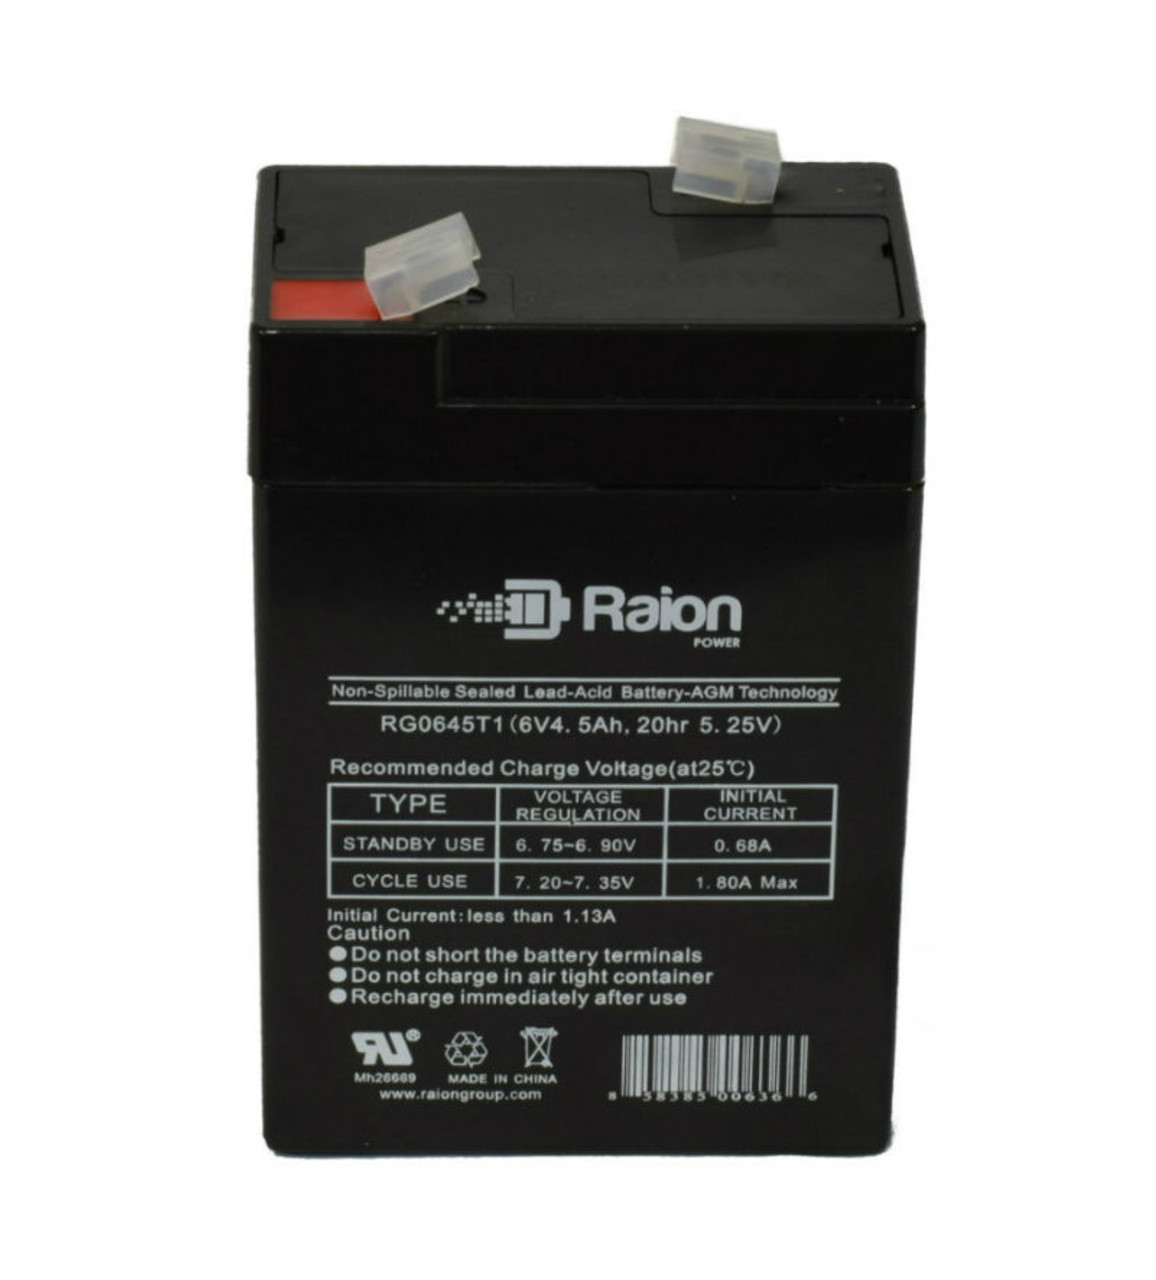 Raion Power RG0645T1 Replacement Battery Cartridge for GP GB5-6